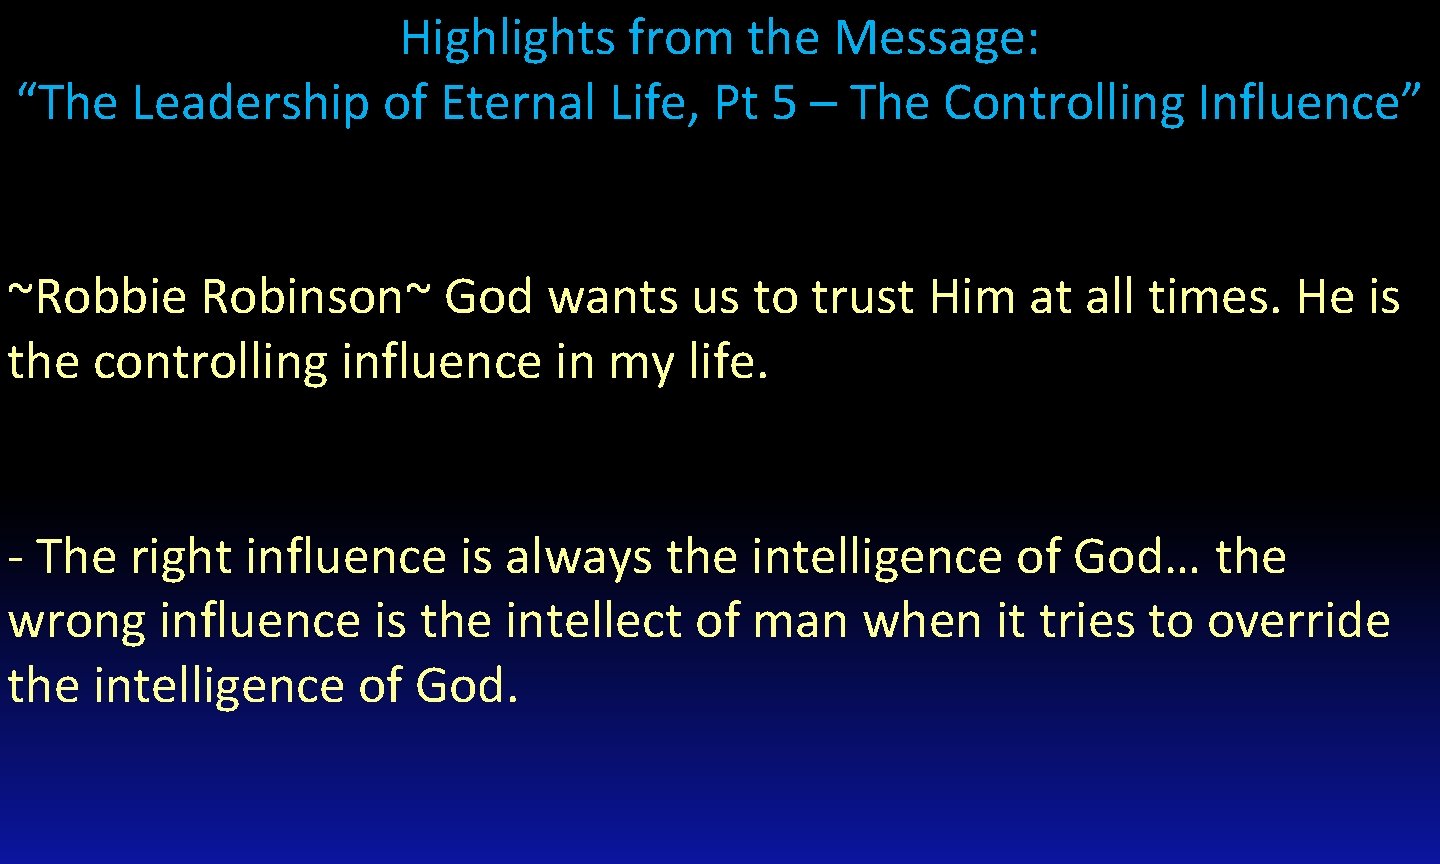 Highlights from the Message: “The Leadership of Eternal Life, Pt 5 – The Controlling